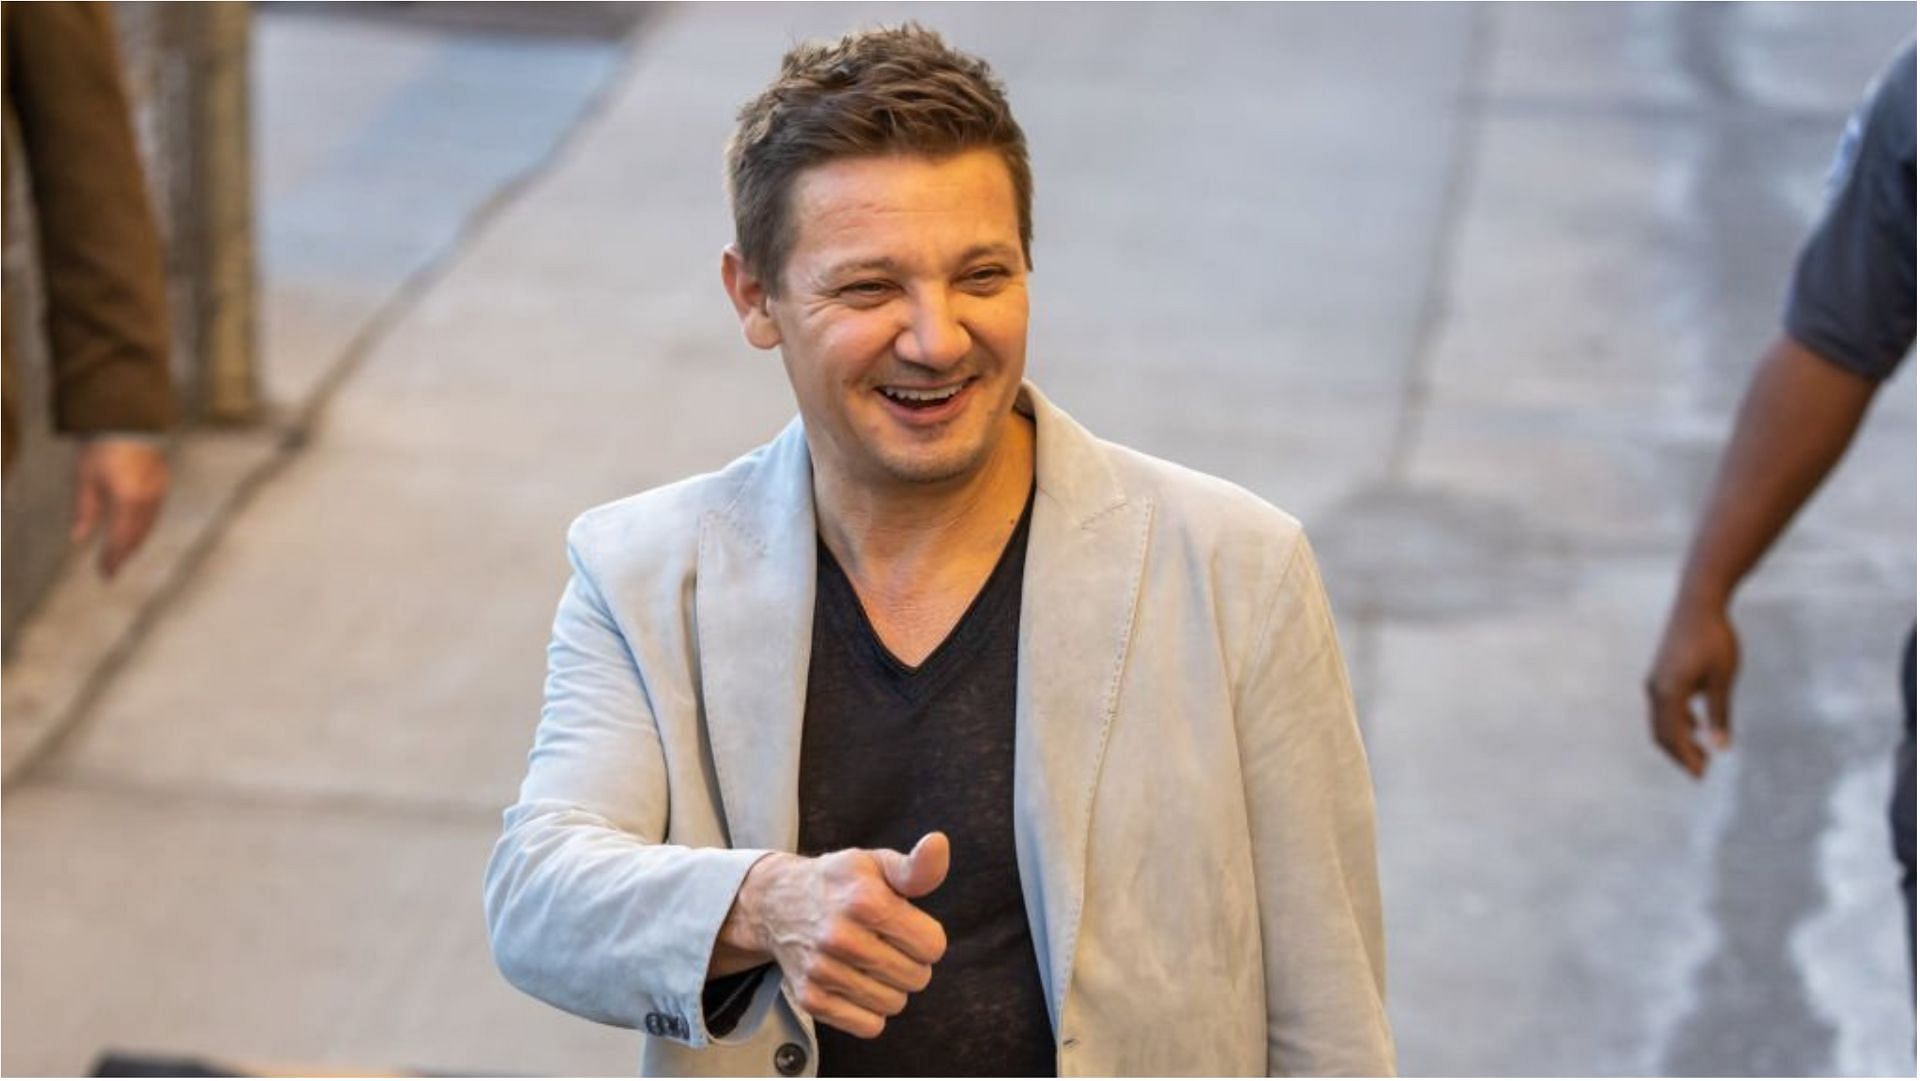 Jeremy Renner met with an accident at his residence (Image via RB/Bauer-Griffin/Getty Images)